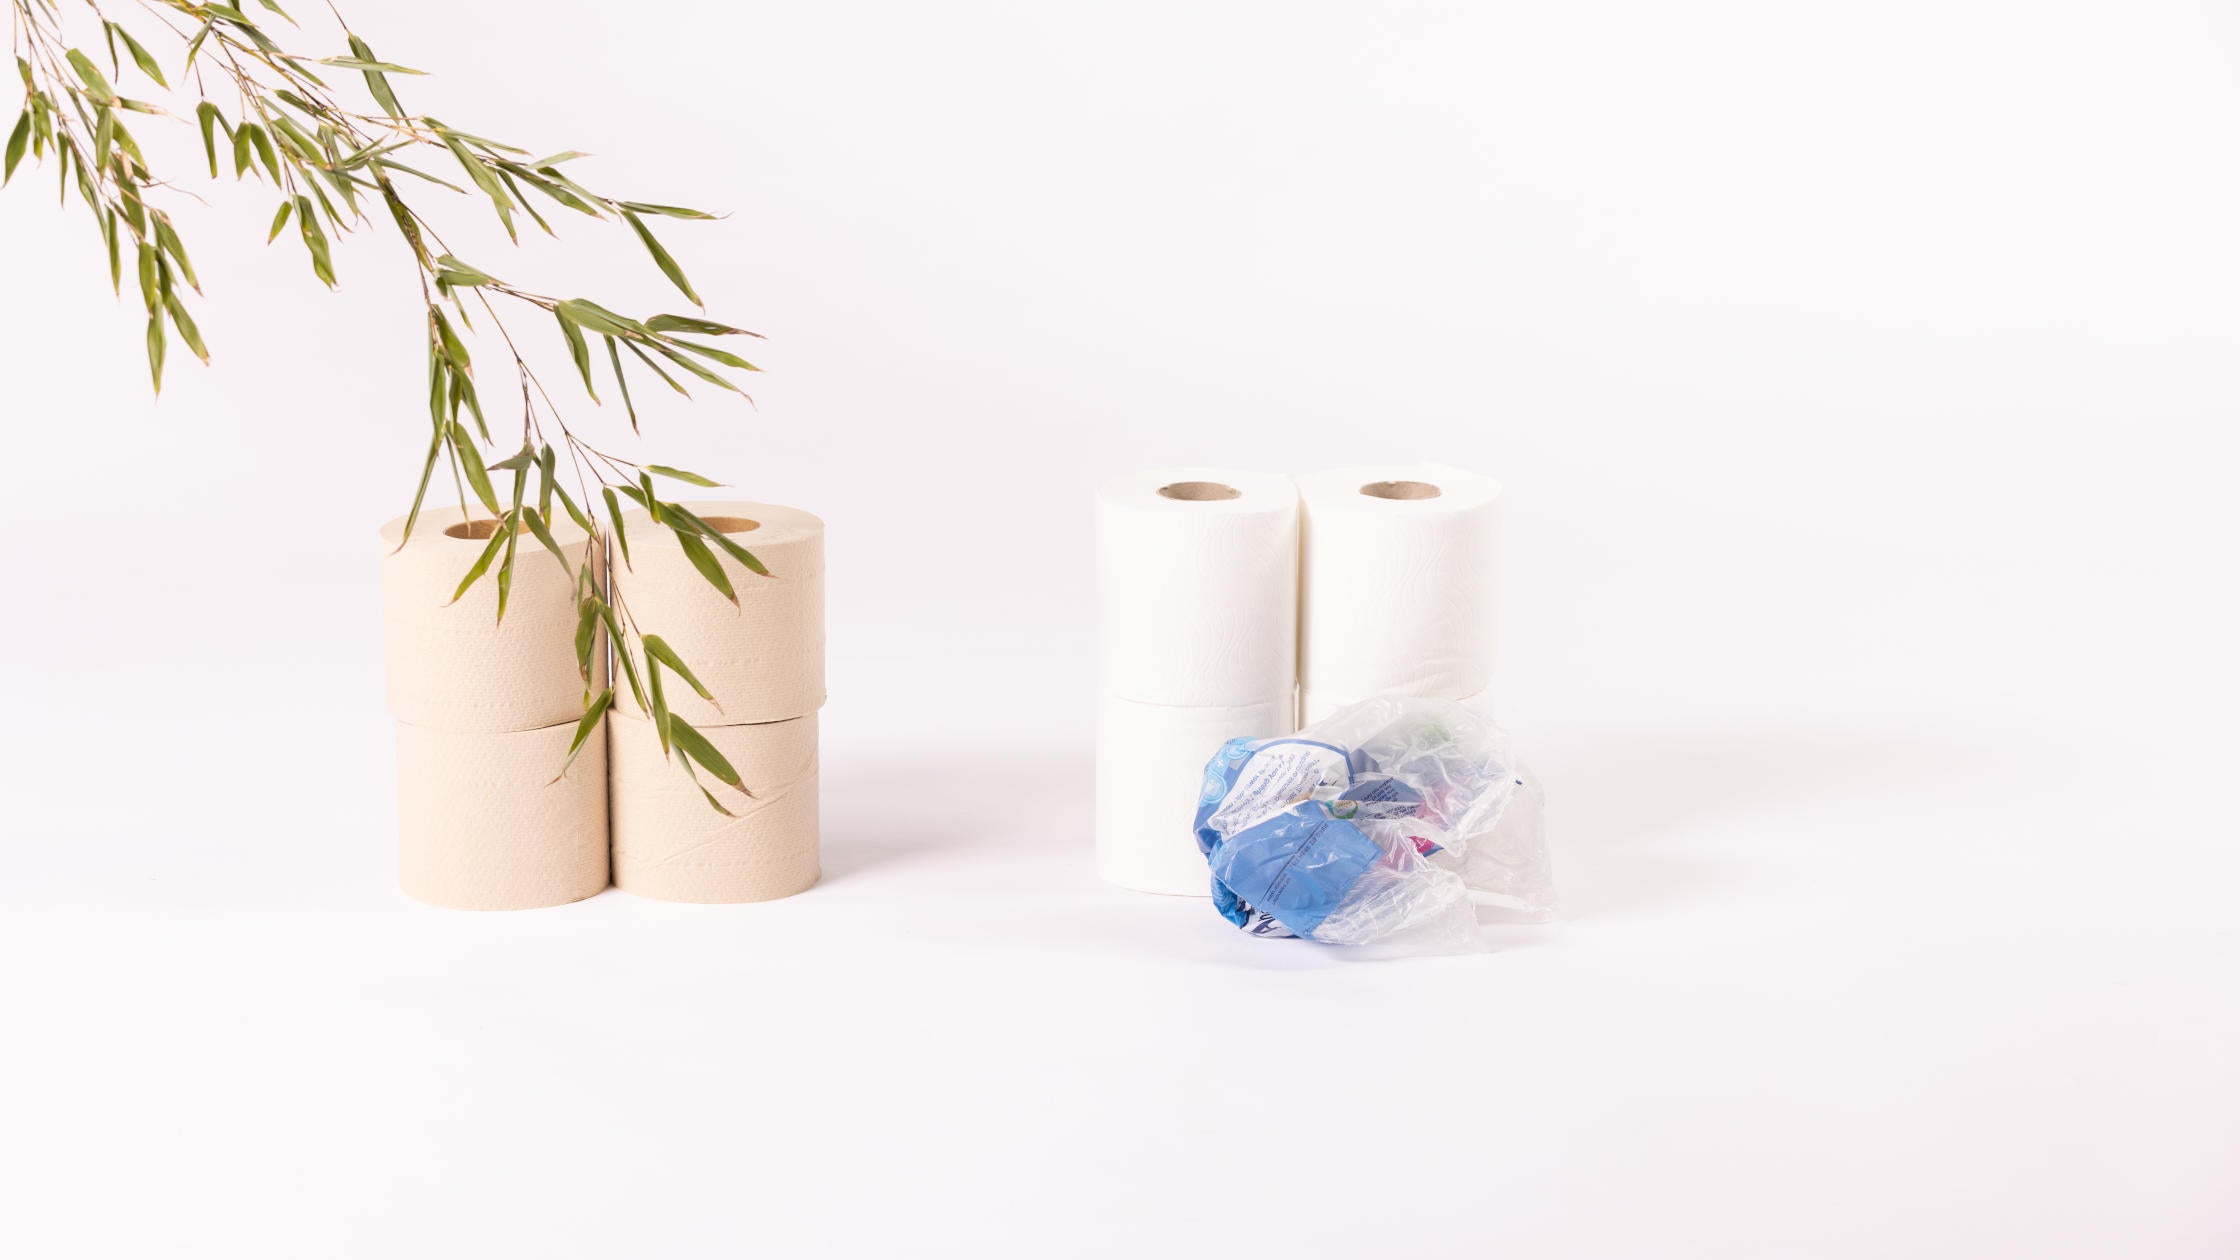 Five Ways Tissue Paper Harms the Environment (and how we can do better)